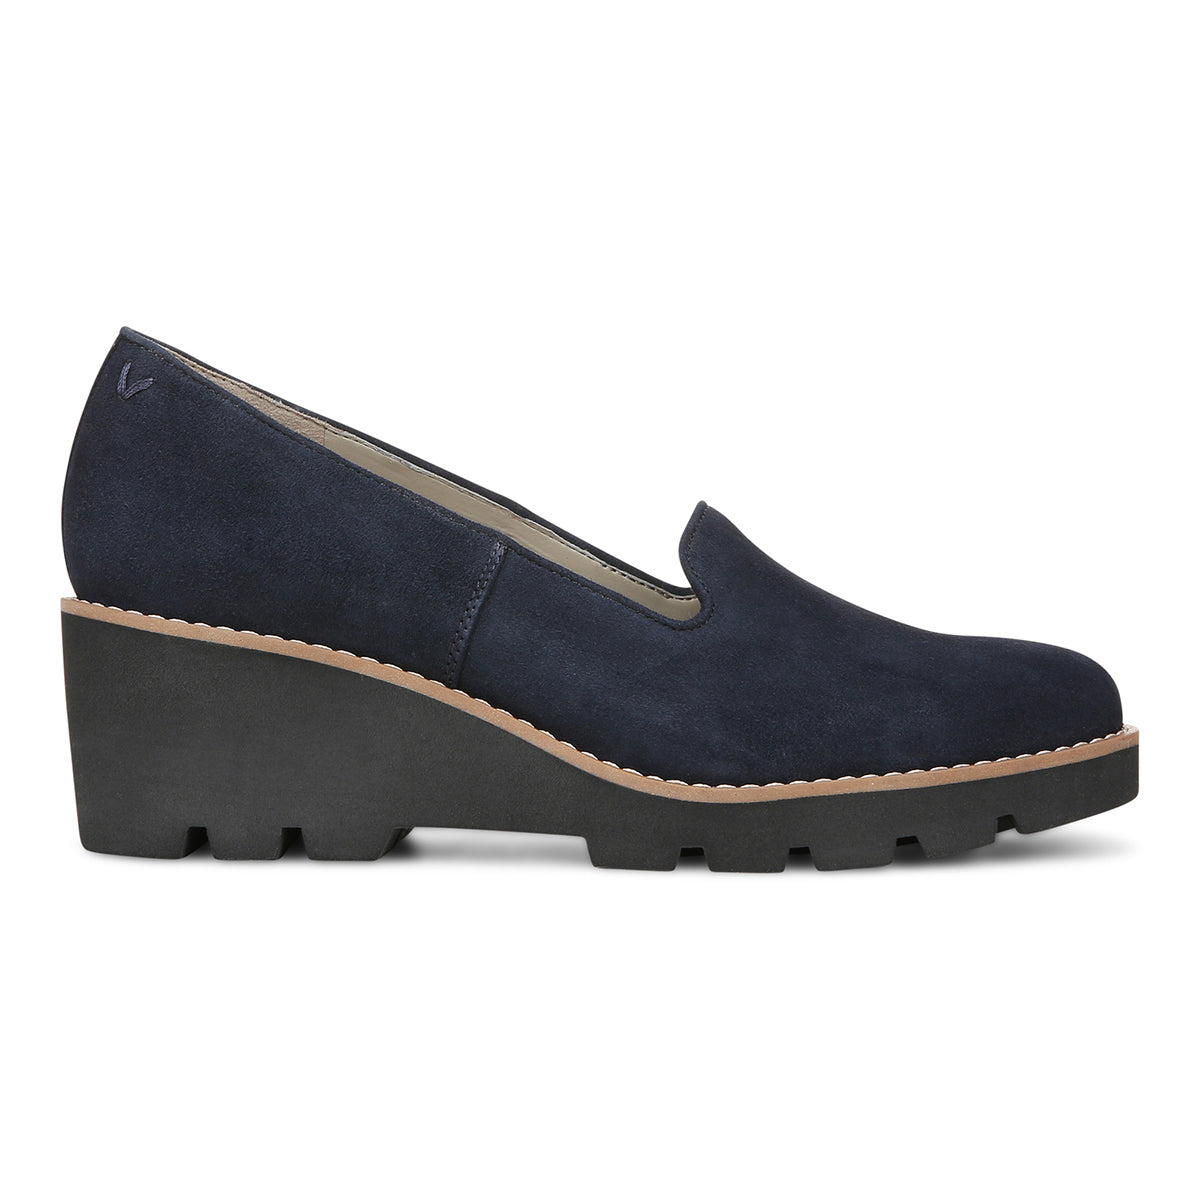 NAVY SUEDE | Right